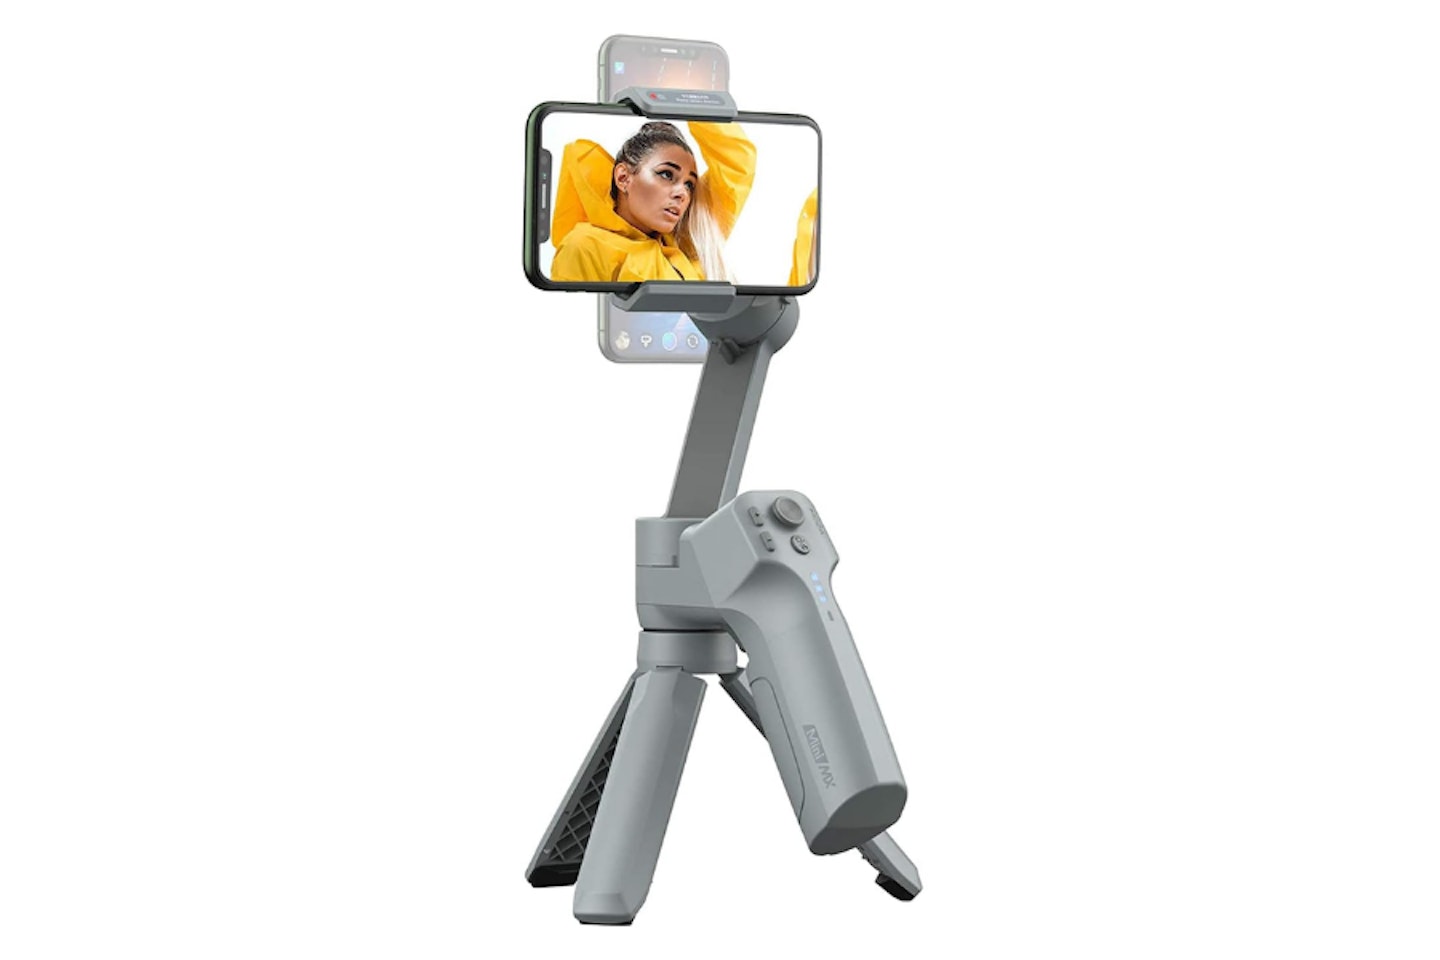 MOZA Mini MX Gimbal Handheld Stabilizer - possibly the best smartphone gimbal